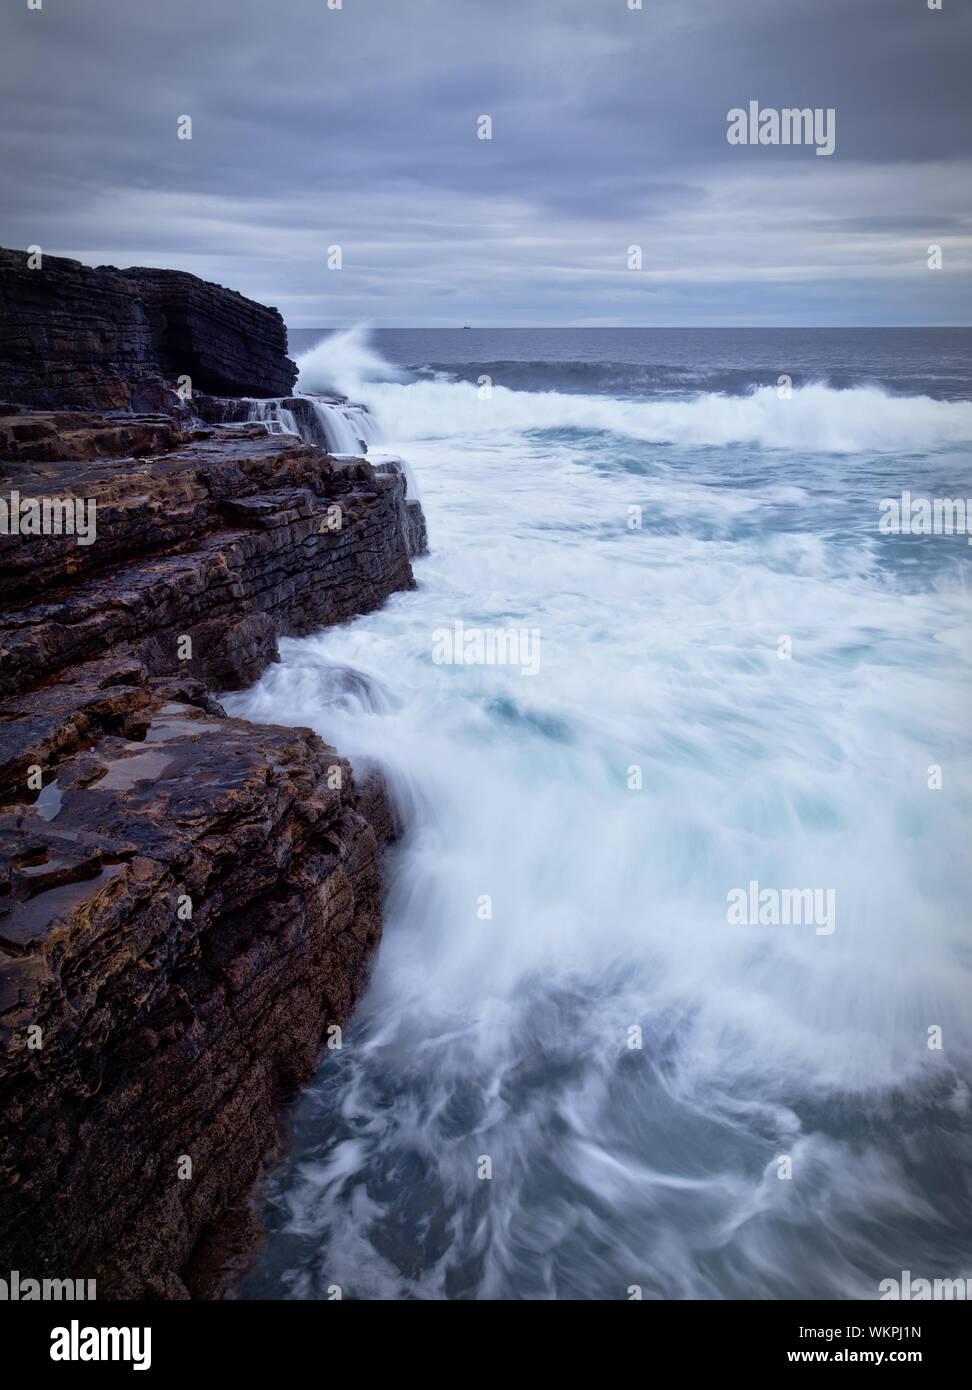 Waves crashing on the brown rocky cliffs of the Irish west coast at dusk (long exposure, portrait) Stock Photo